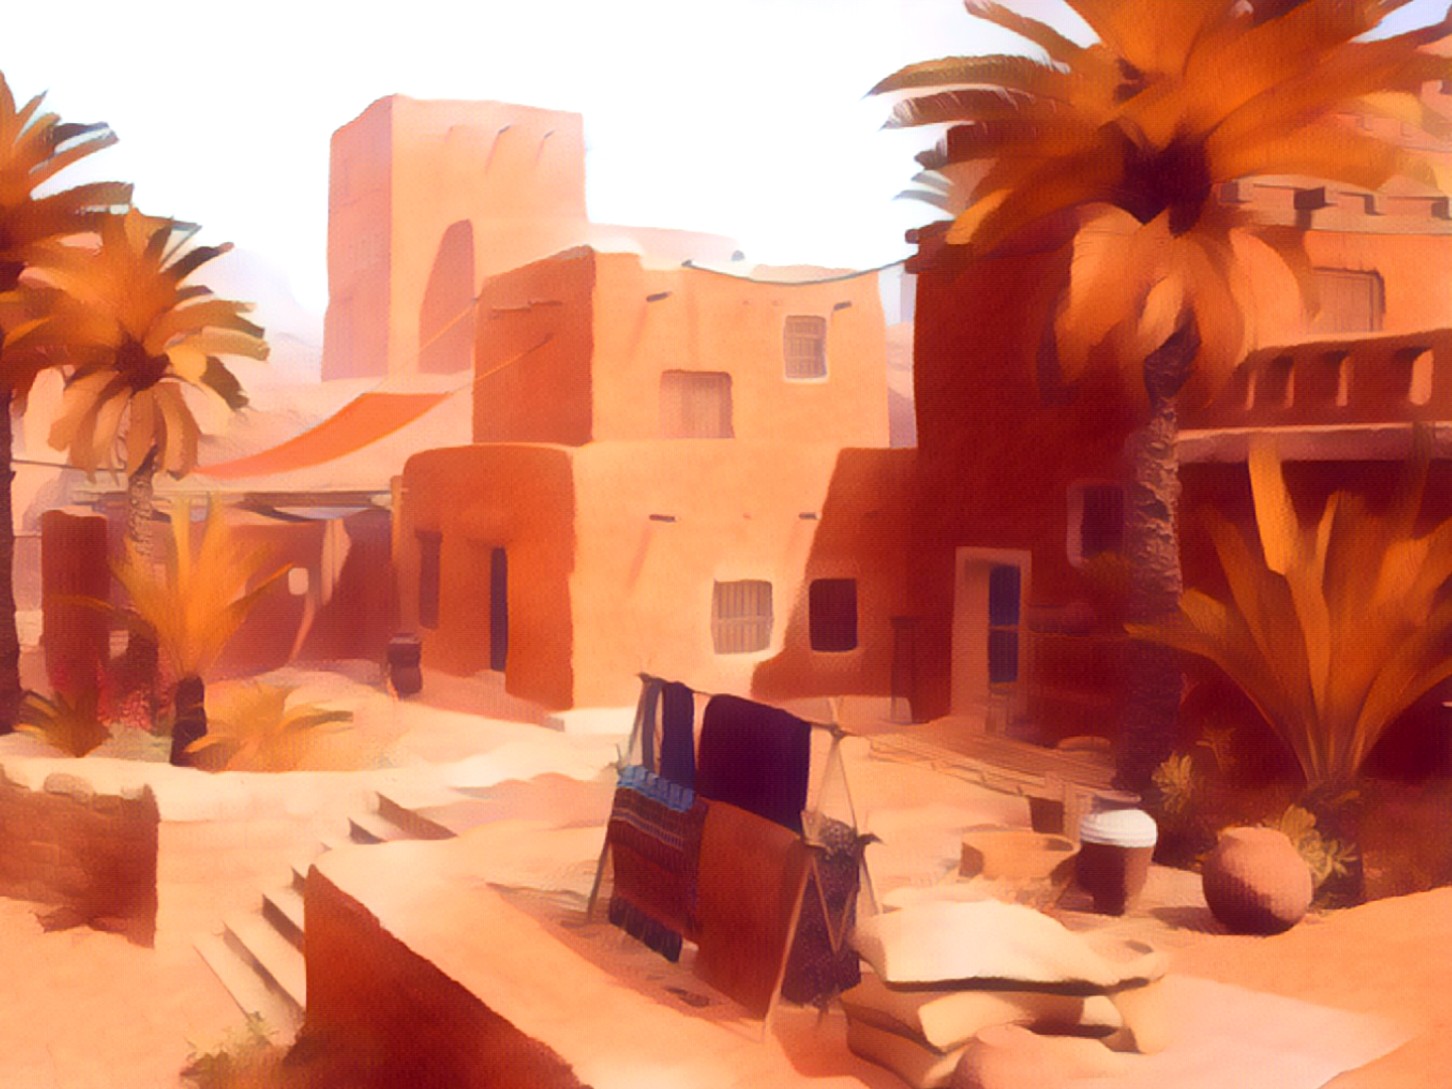 rendered image of buildings the color of sand with boxy exteriors, surrounded by palm trees and clothes drying